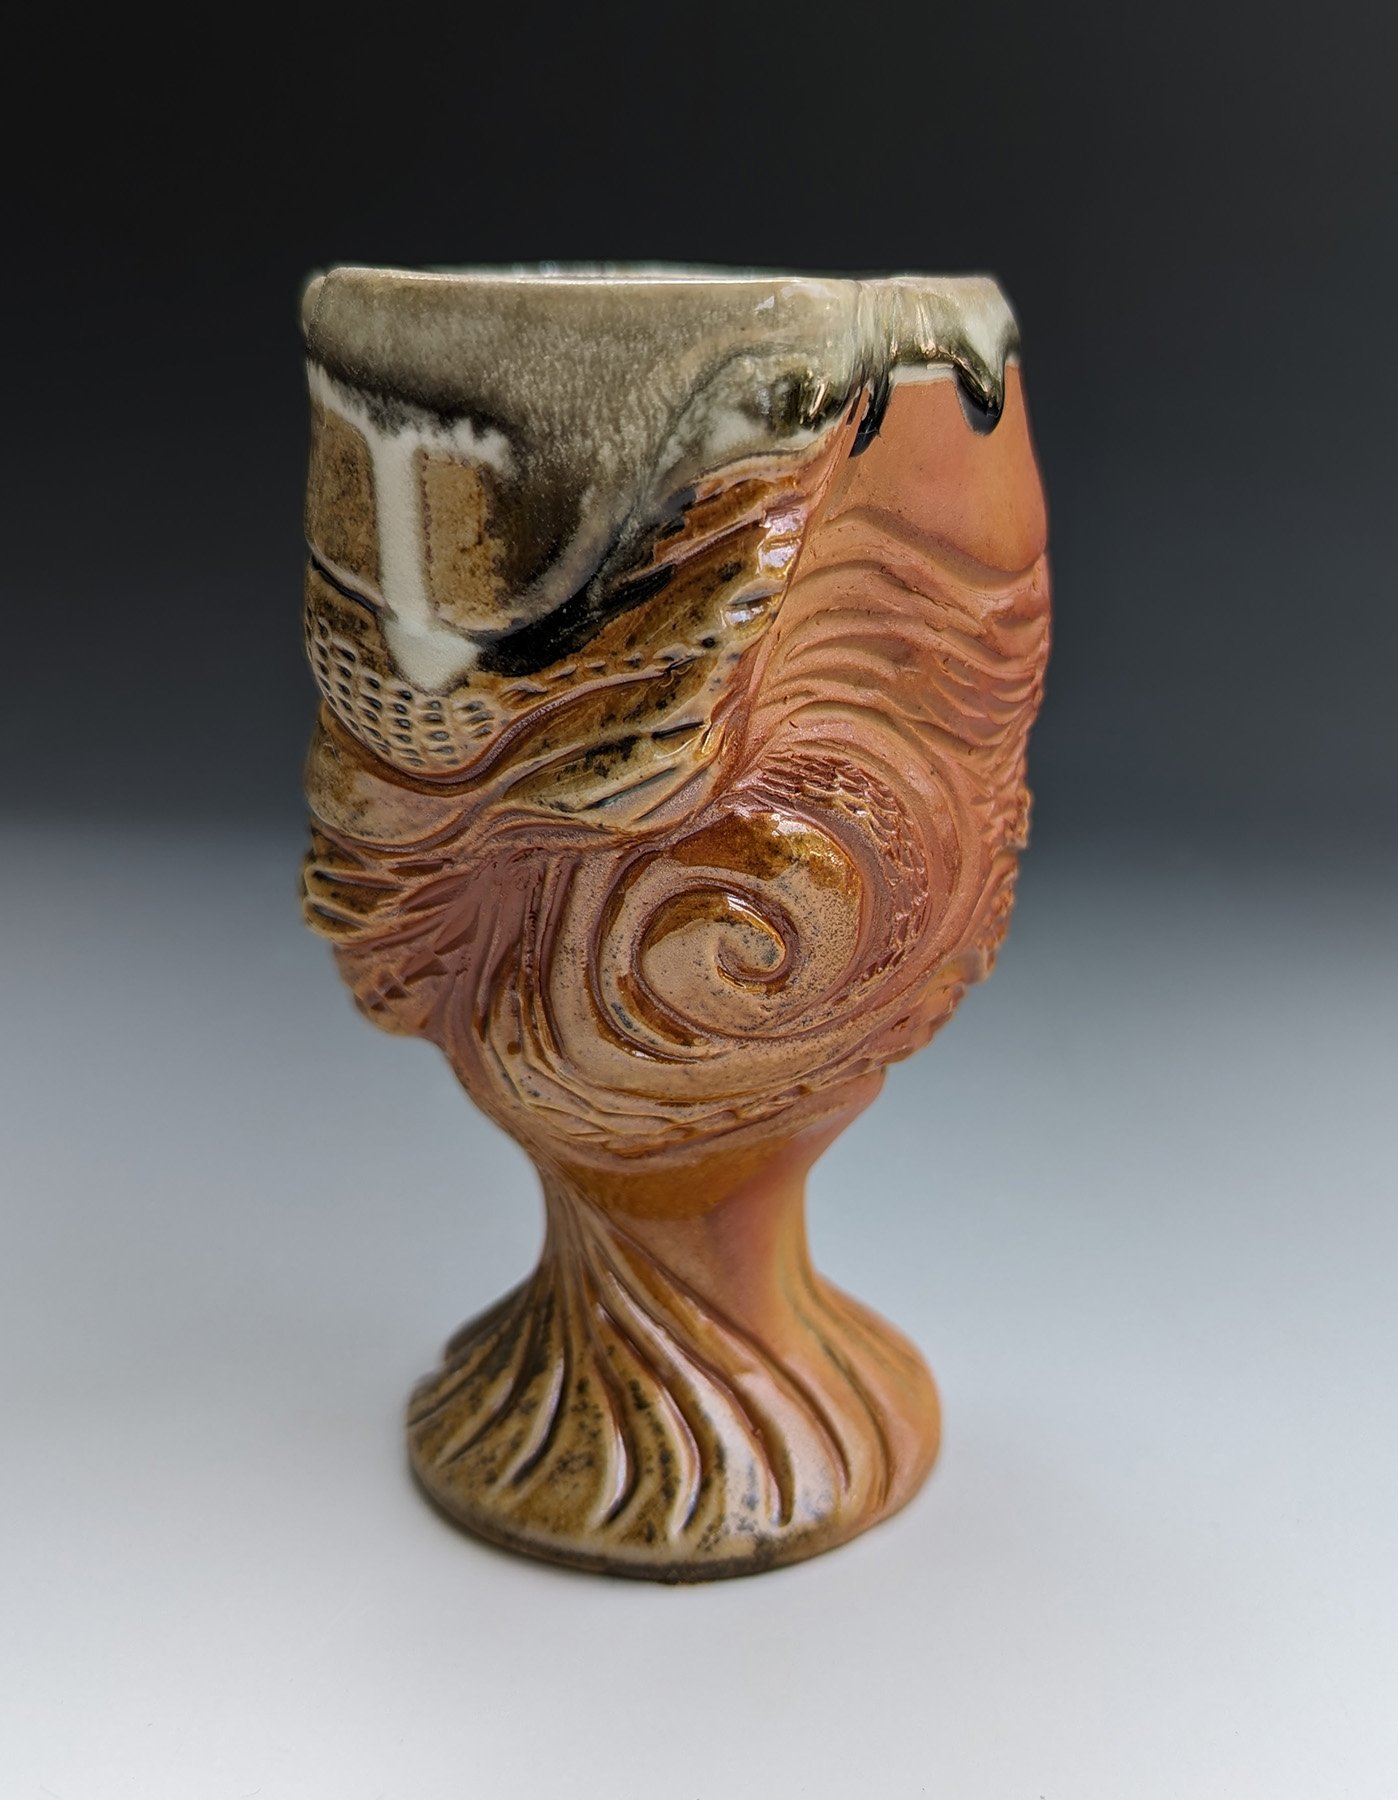    Carved Wine Cup,    wood-fired ceramics, 5 x 3.5 x 3.5 inches 